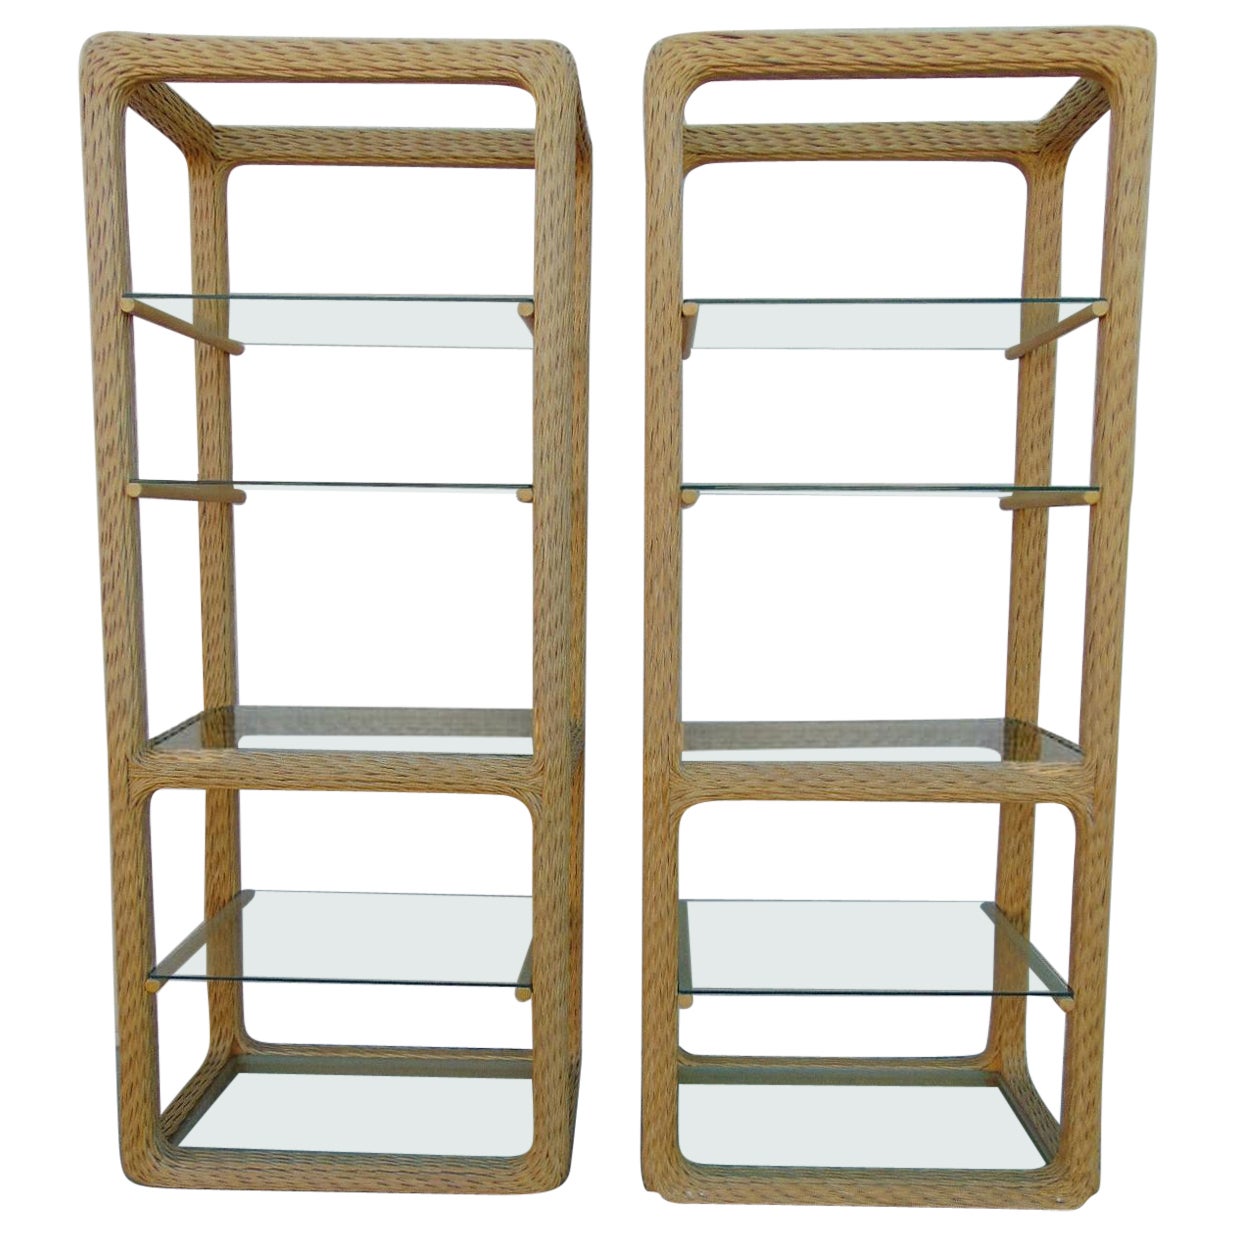 Twisted Rattan Organic Modern Etageres, a Pair For Sale